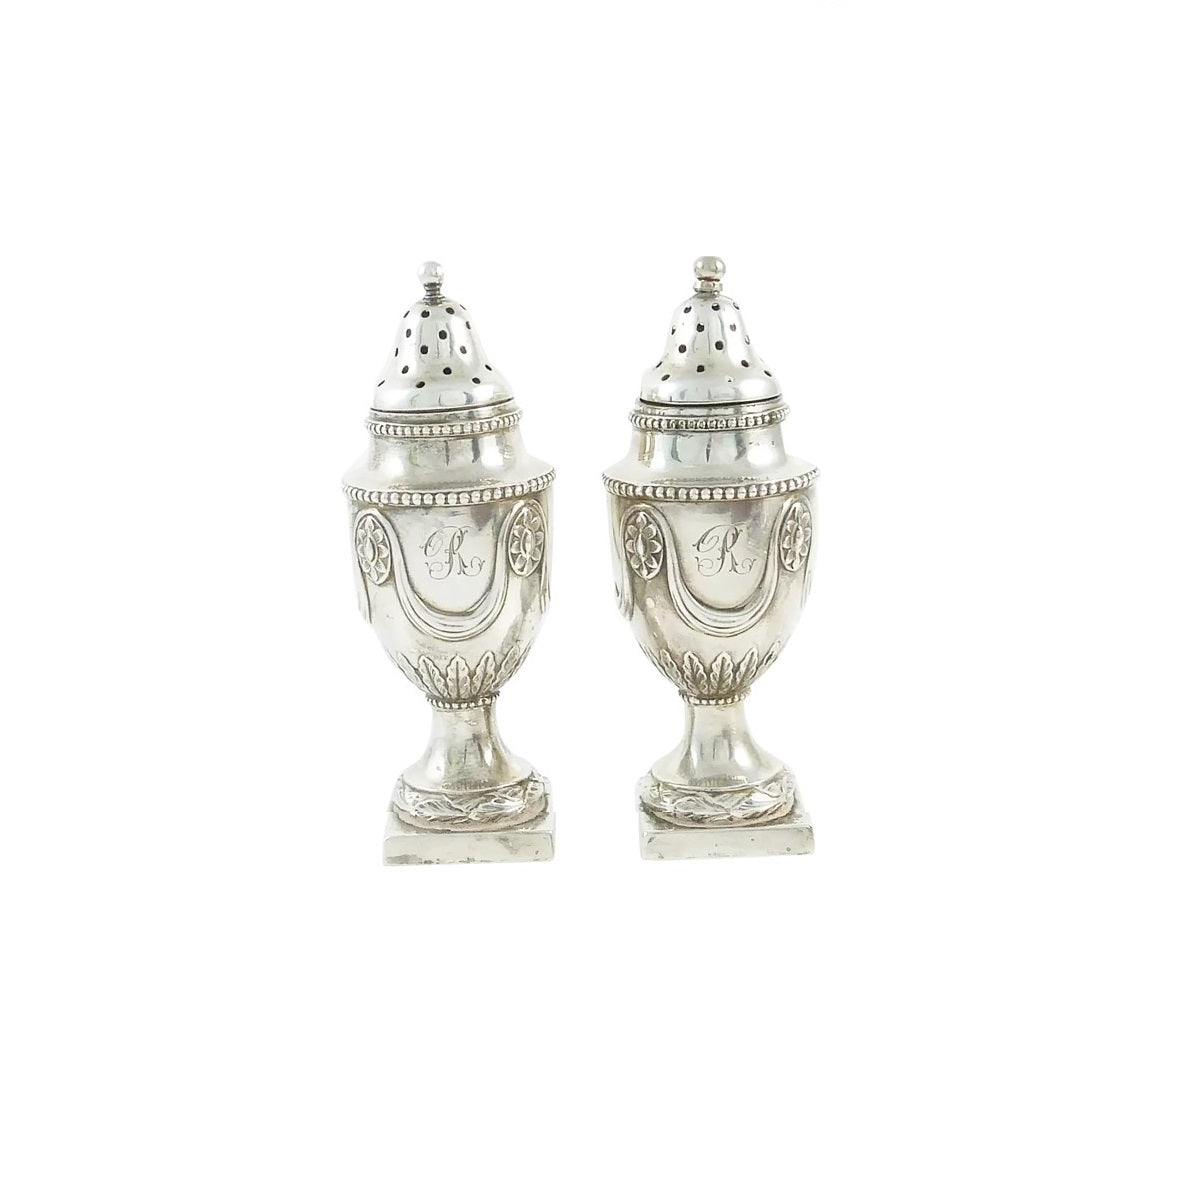 Antique Sterling Silver English Pepperettes, Castor or Shakers, A Pair - 43 Chesapeake Court Antiques